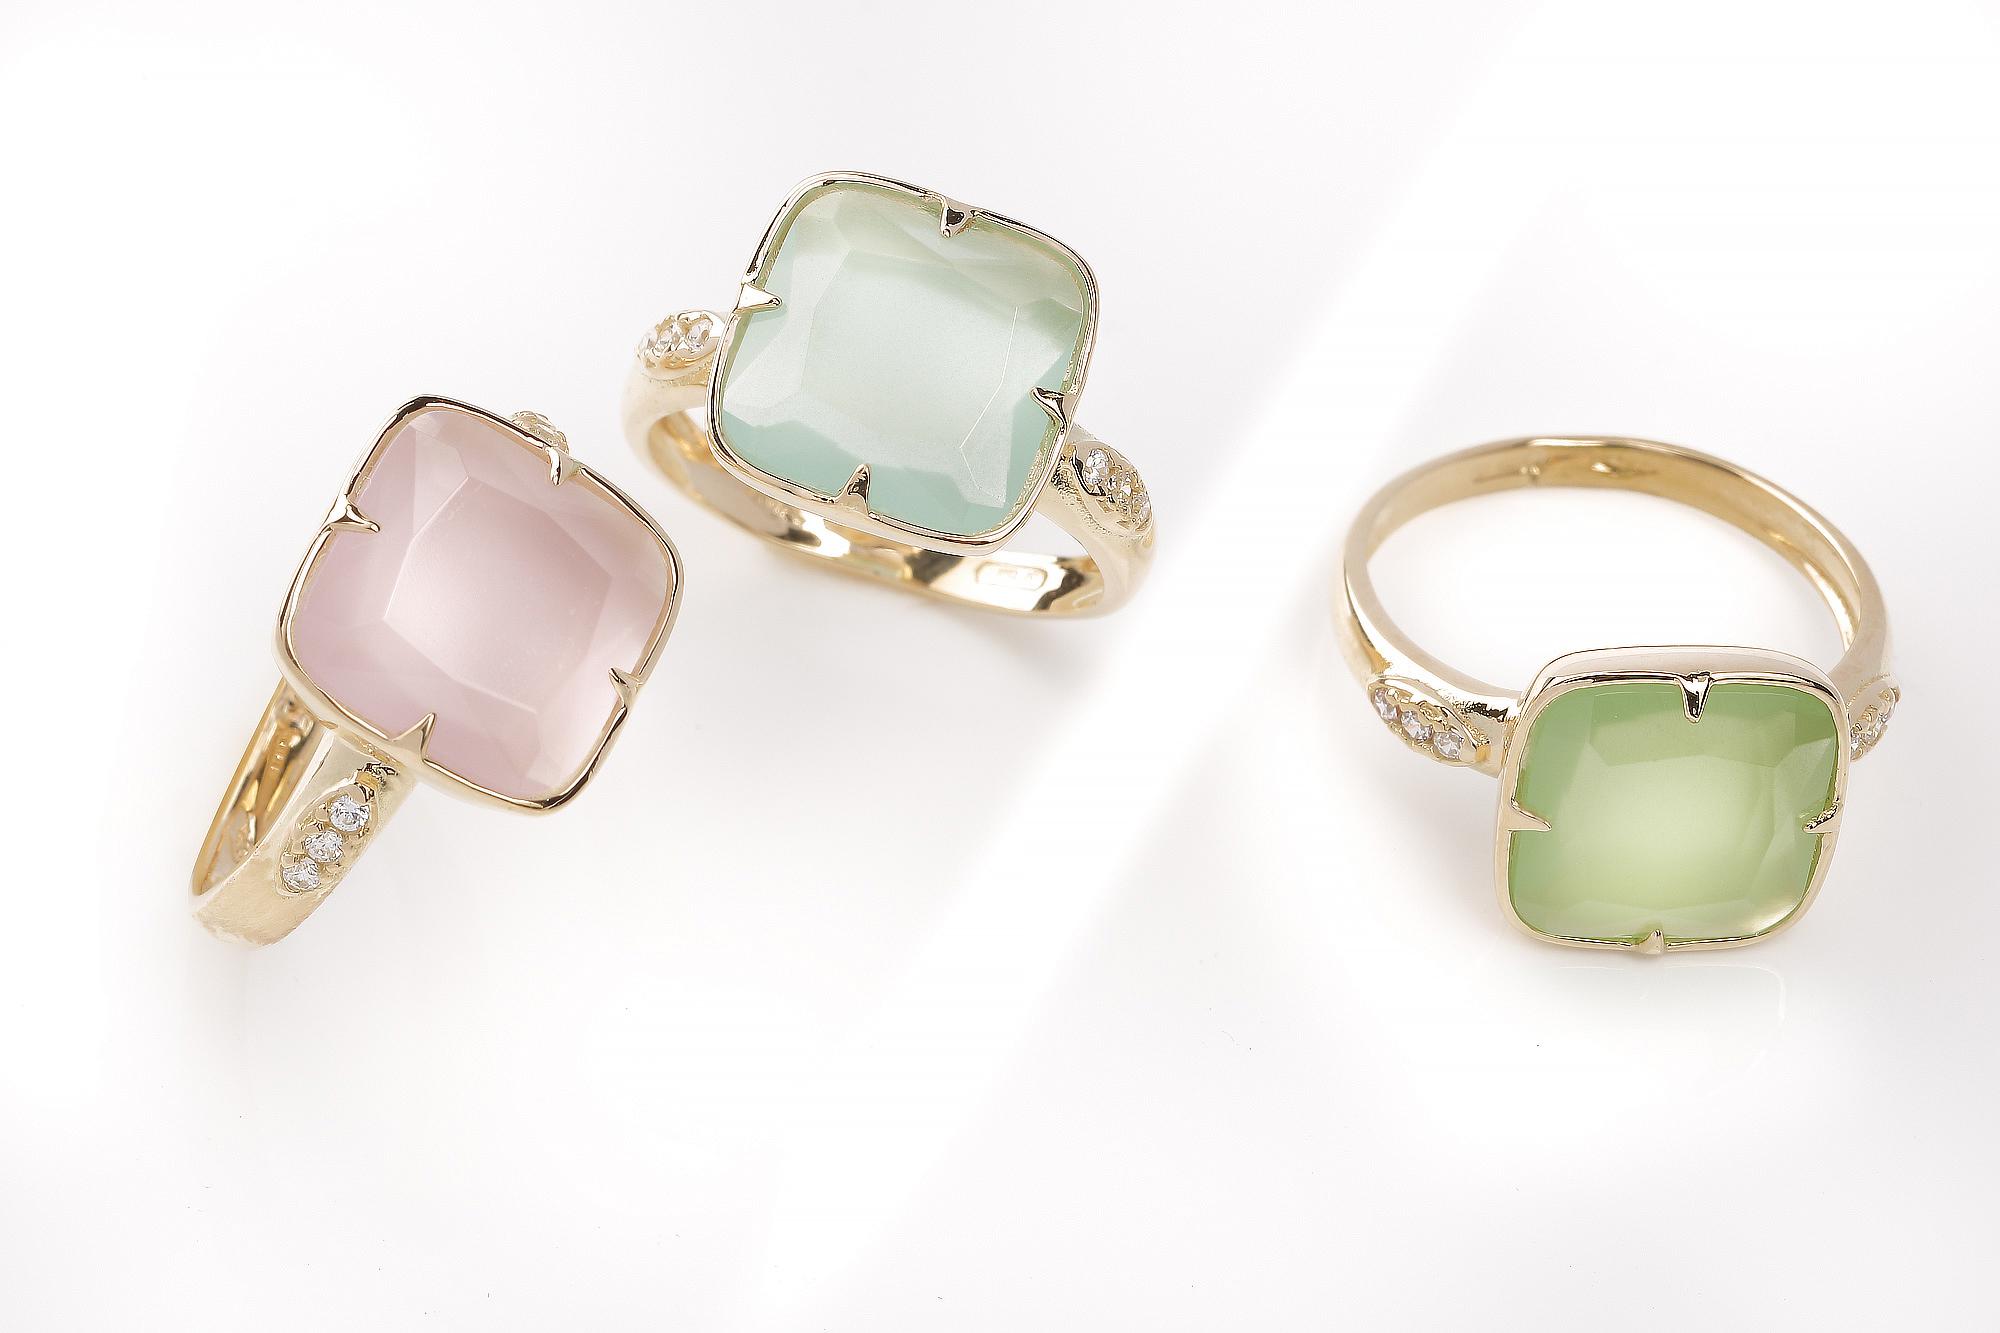 Parrini Gioielli - Rings with stones and gem